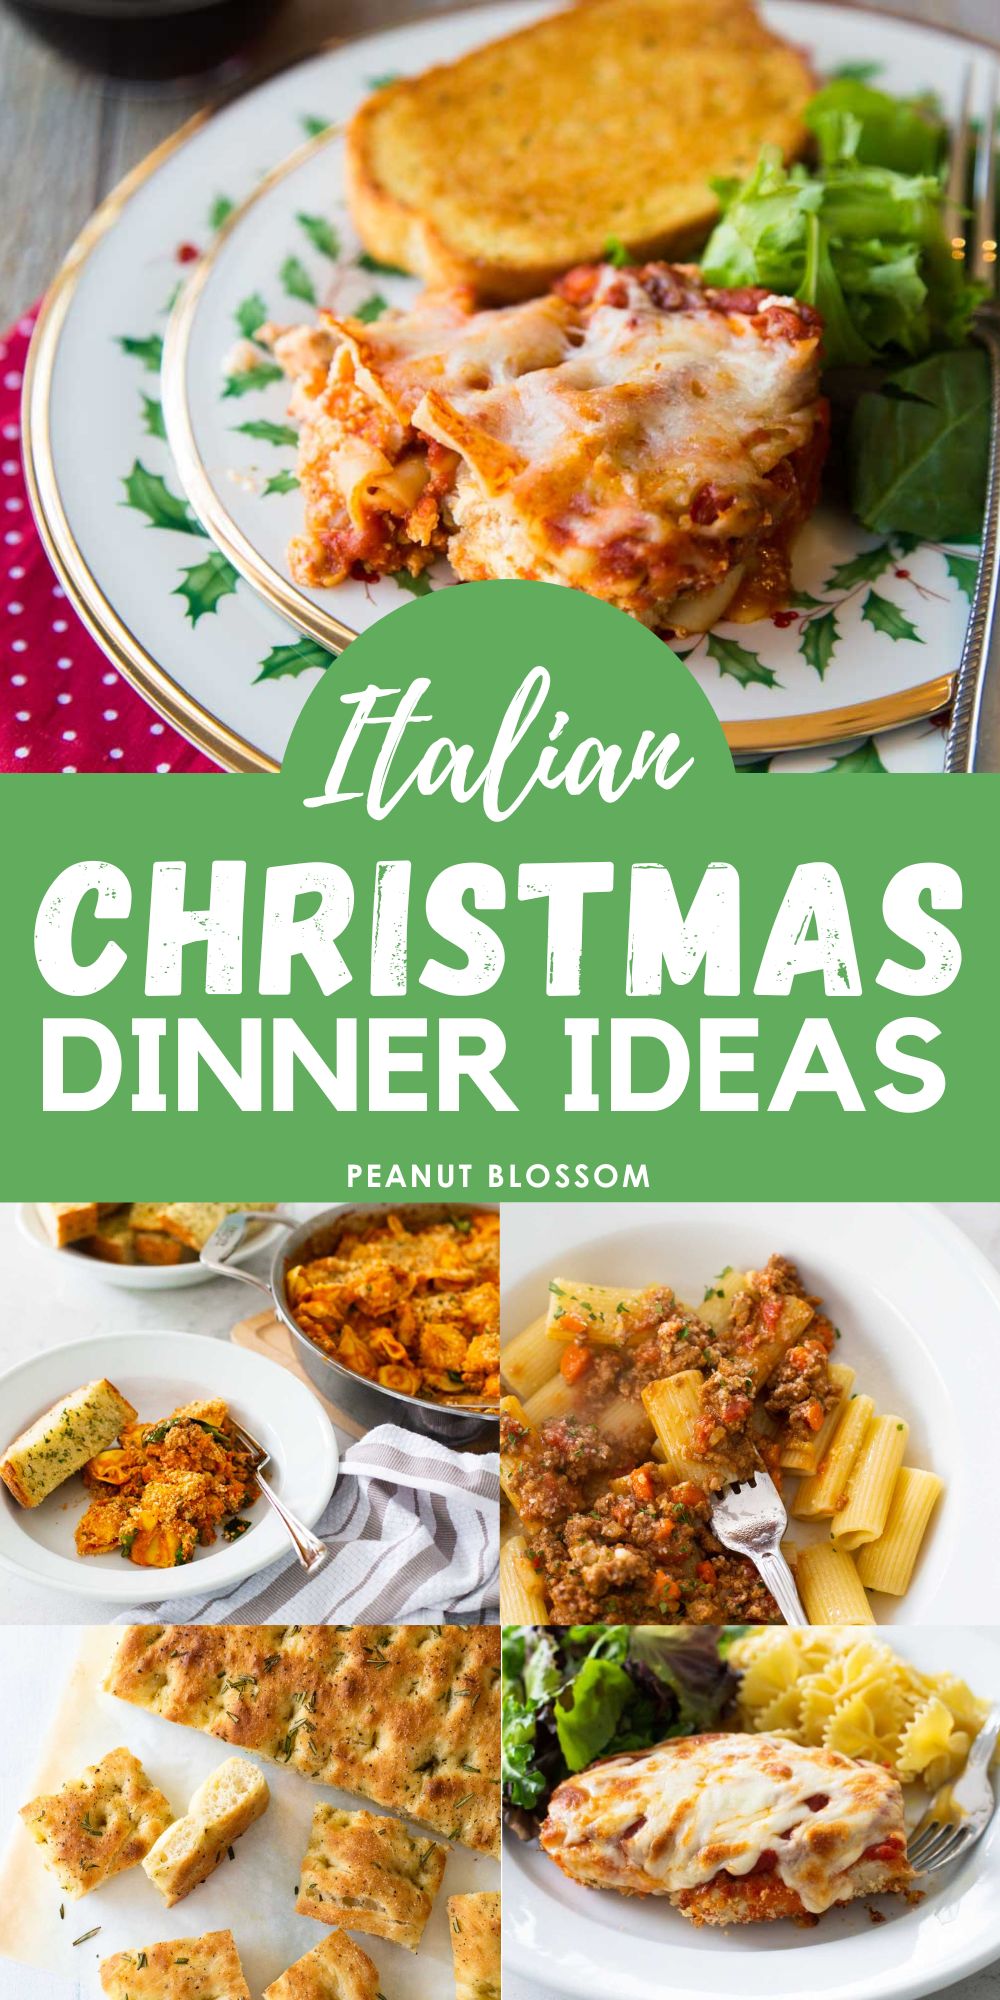 The photo collage shows several Italian pastas and side dishes for a Christmas dinner.